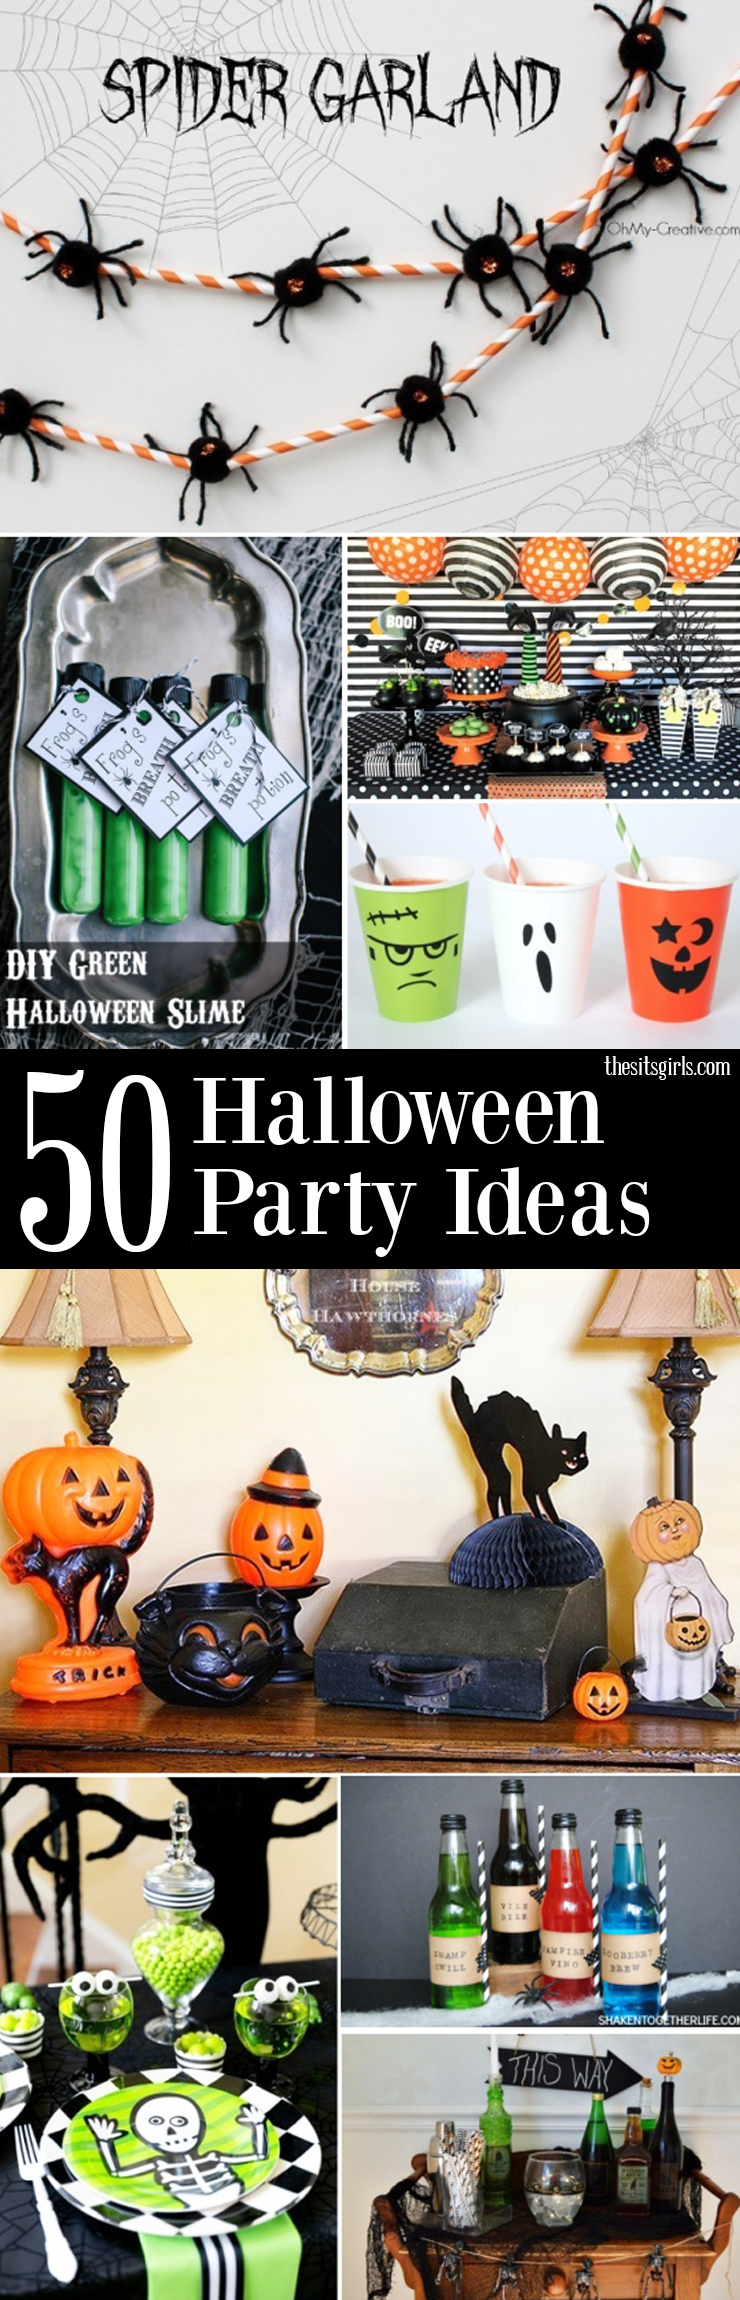 Great Halloween party ideas to help you throw the perfect party - with cute party food, Halloween decor, party favors and more!